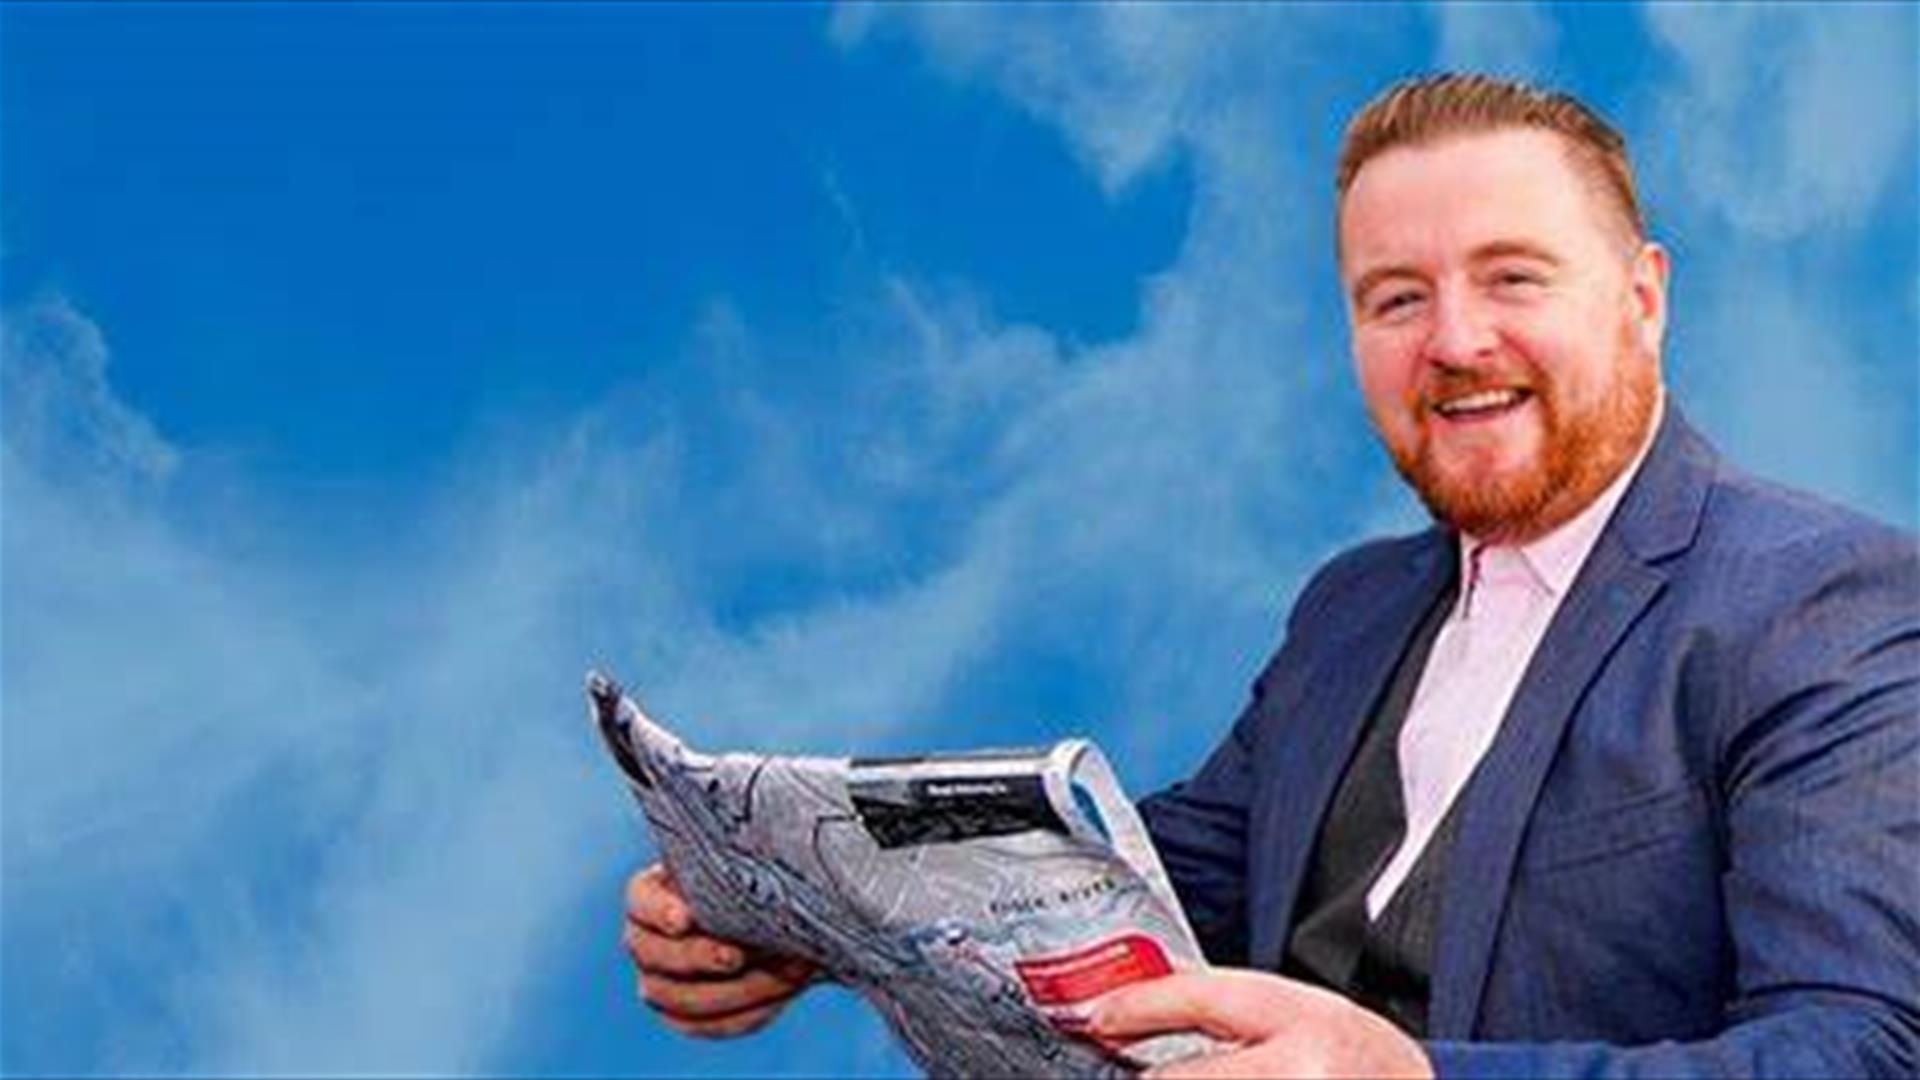 Image shows a man with a beard, wearing a suit and holding a newspaper